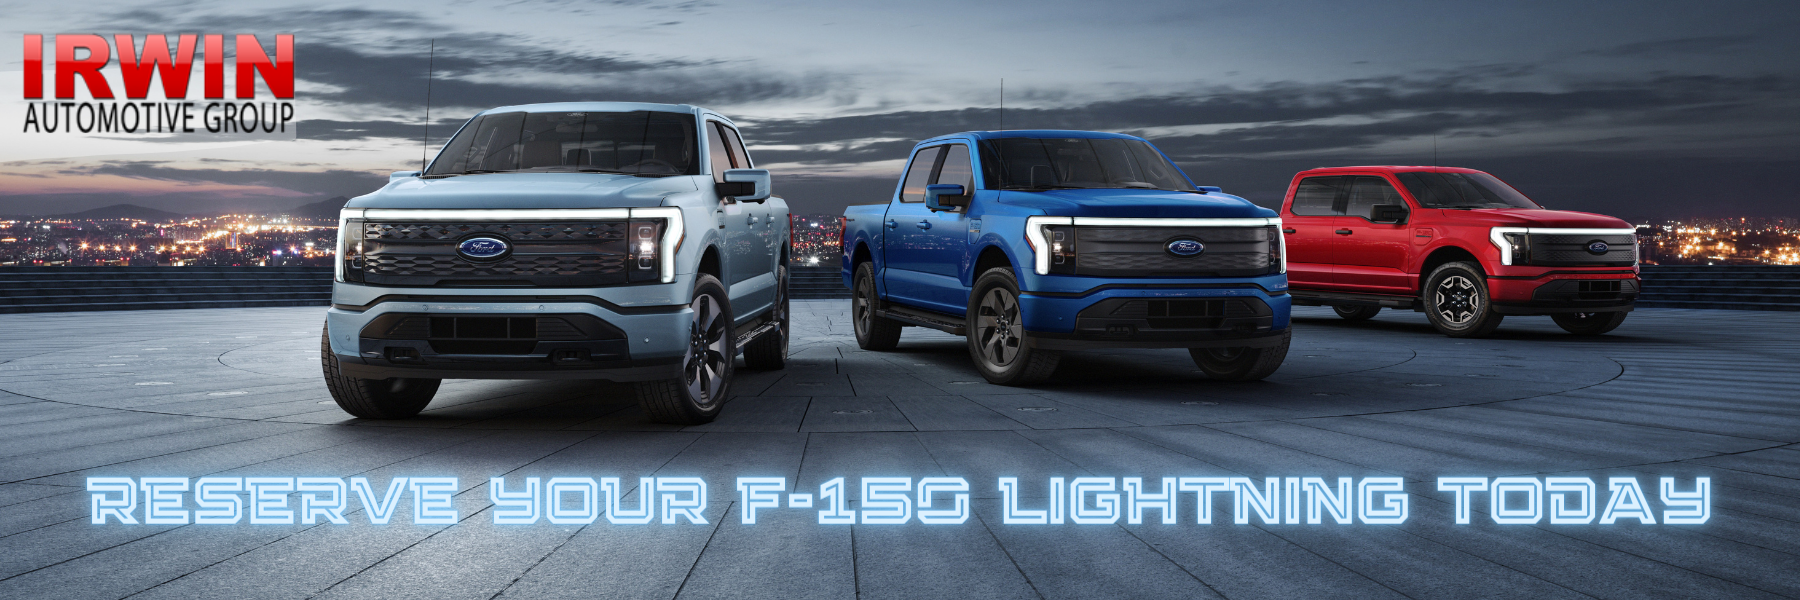 Reserve Your Ford F-150 Lightning with Irwin Auto Group